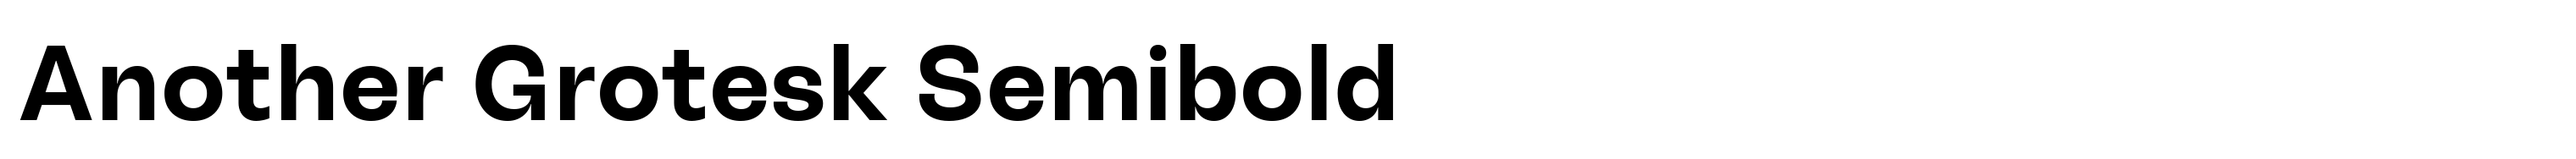 Another Grotesk Semibold